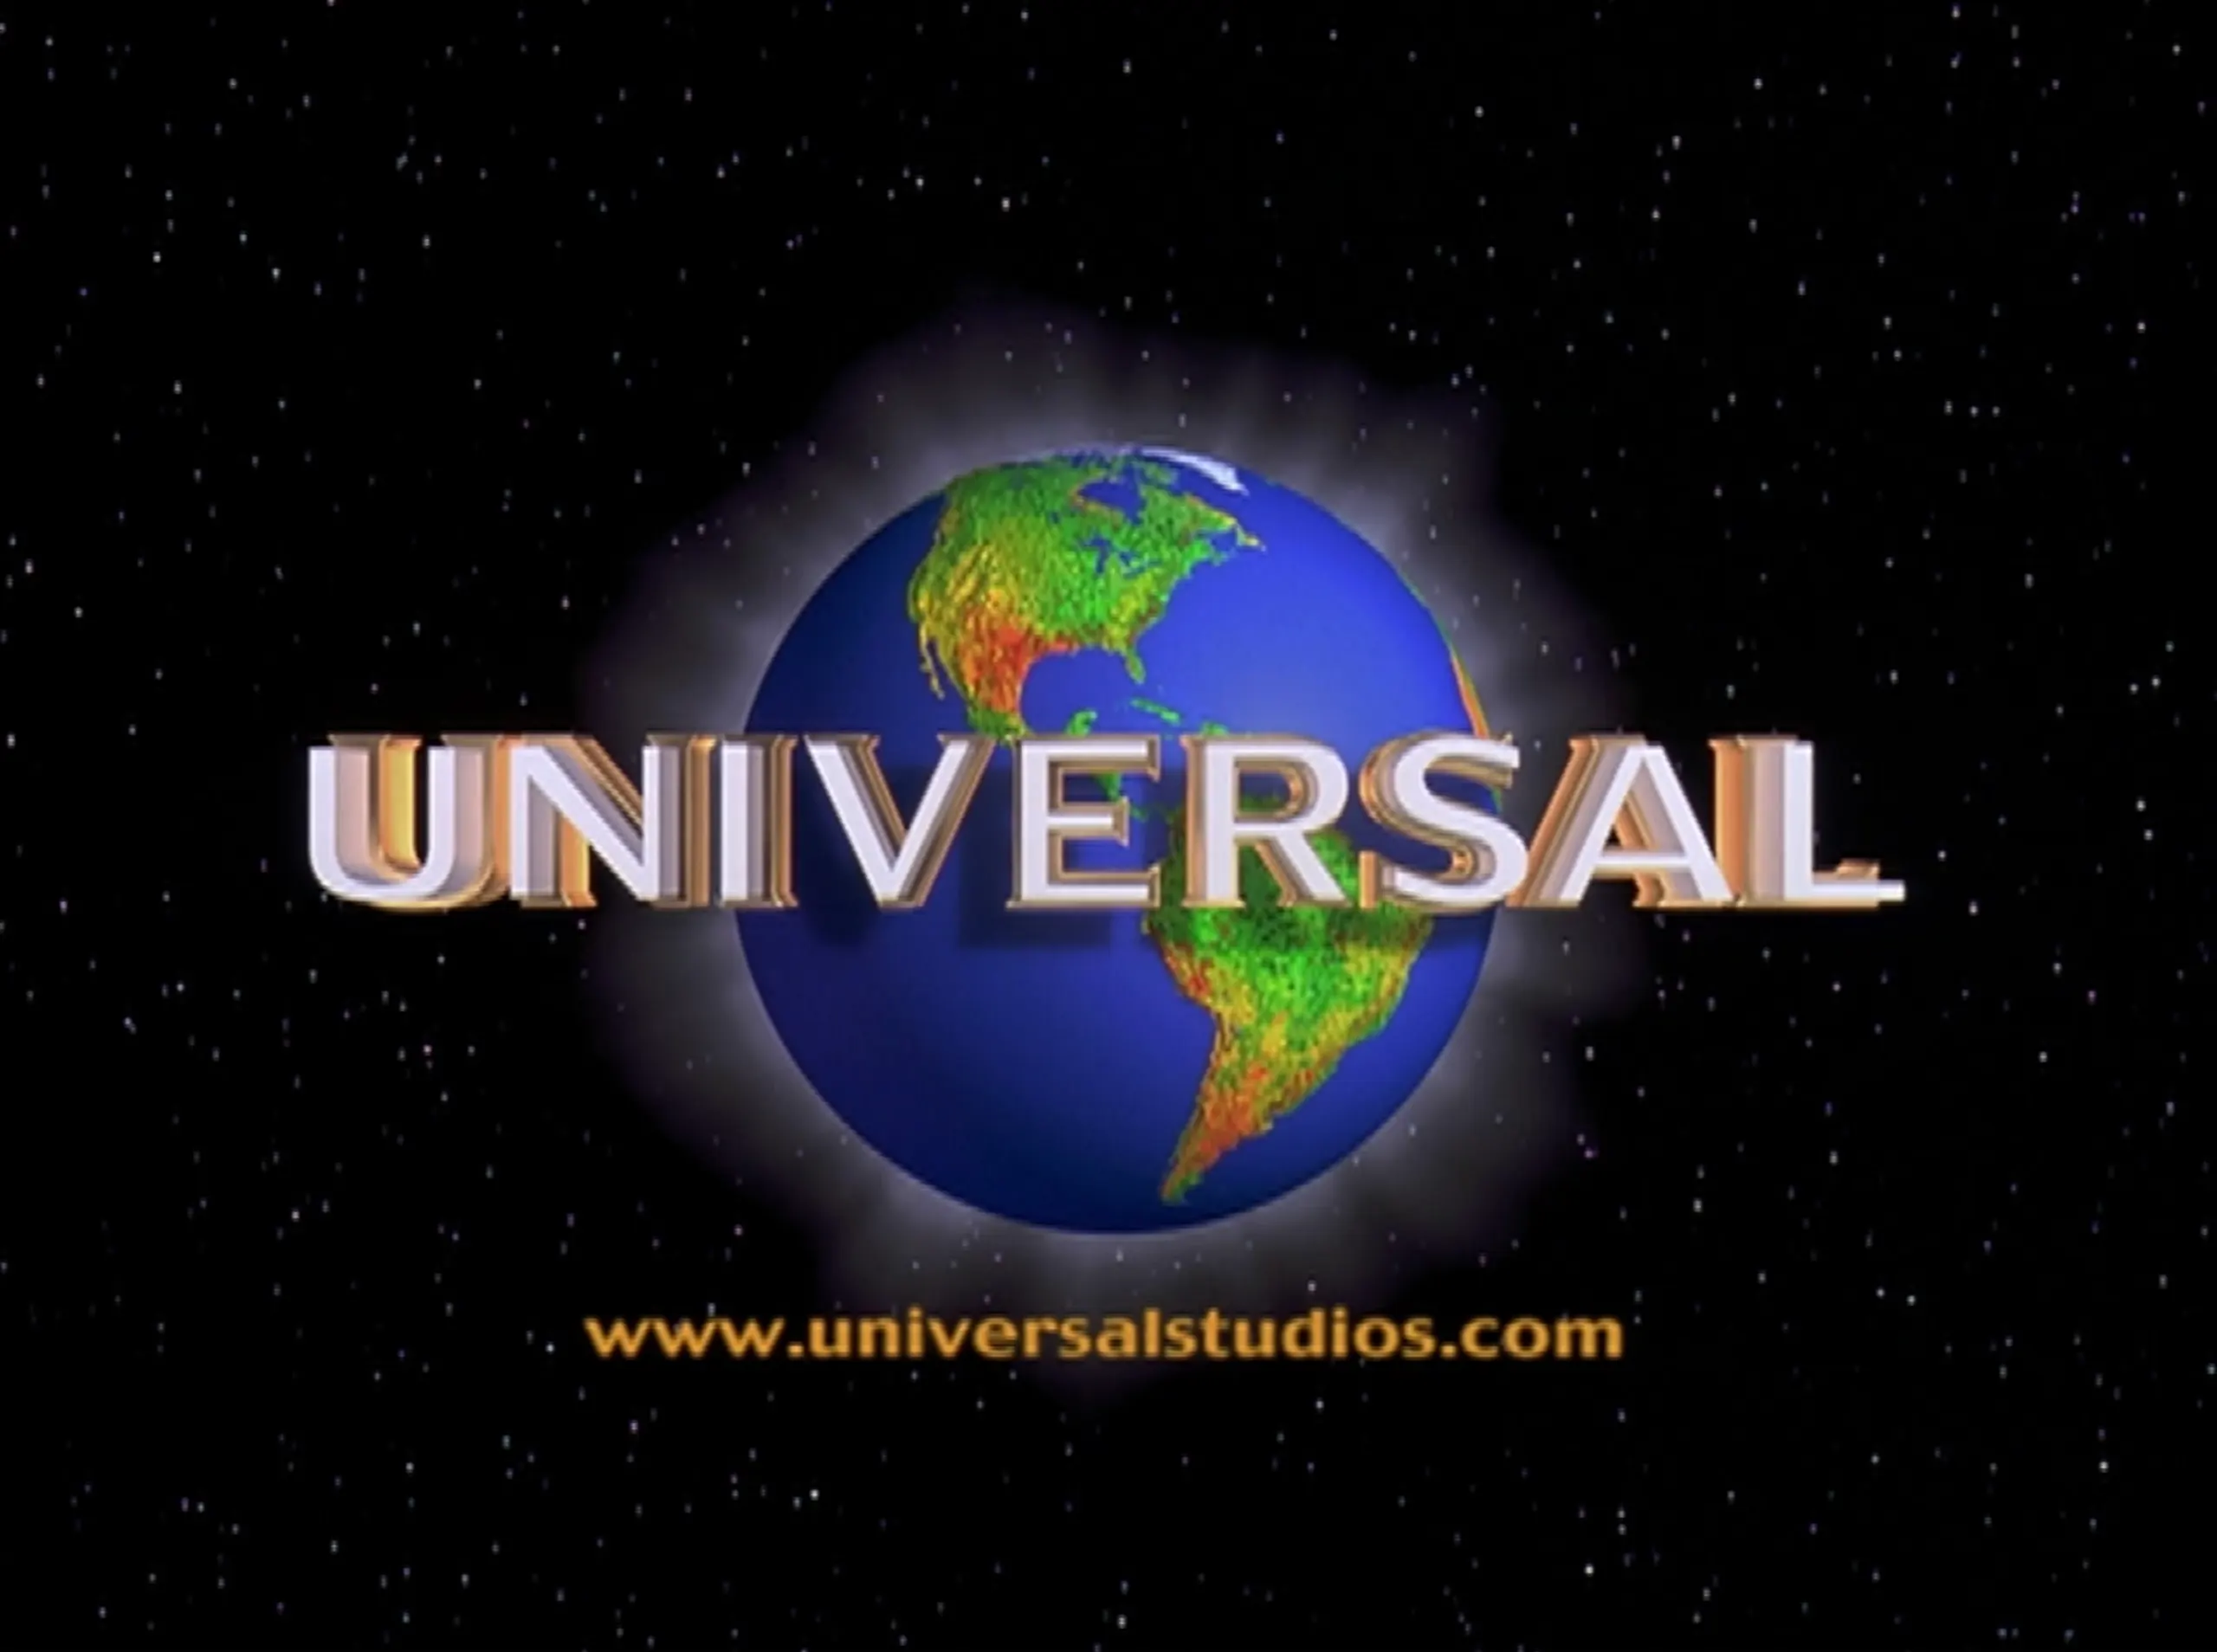 An Open Letter to Universal